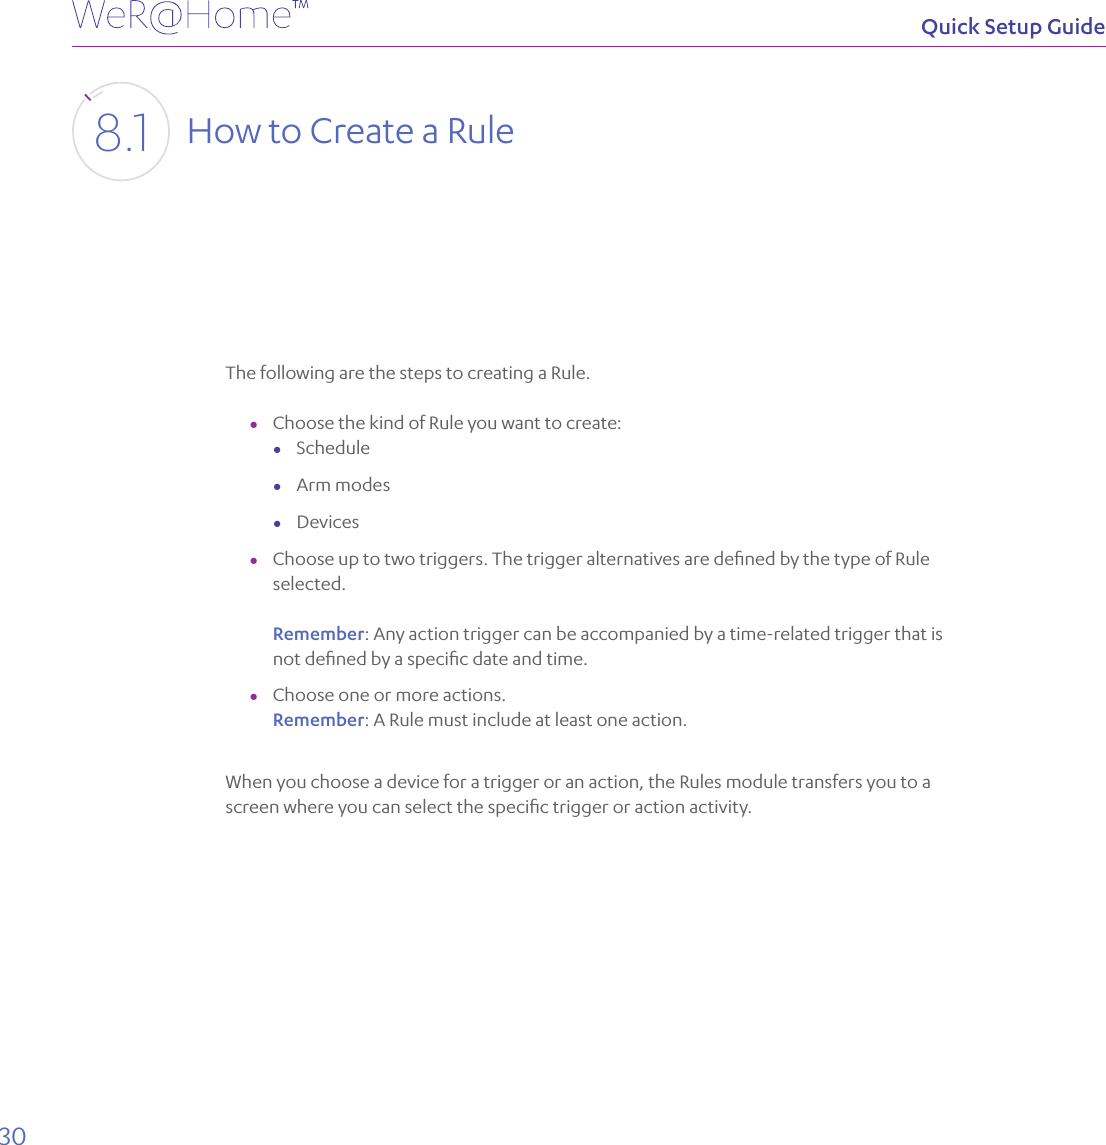 30Quick Setup GuideHow to Create a Rule8.1The following are the steps to creating a Rule.  ●Choose the kind of Rule you want to create: ●Schedule ●Arm modes ●Devices ●Choose up to two triggers. The trigger alternatives are deﬁned by the type of Rule selected.  Remember: Any action trigger can be accompanied by a time-related trigger that is not deﬁned by a speciﬁc date and time. ●Choose one or more actions. Remember: A Rule must include at least one action.When you choose a device for a trigger or an action, the Rules module transfers you to a screen where you can select the speciﬁc trigger or action activity.